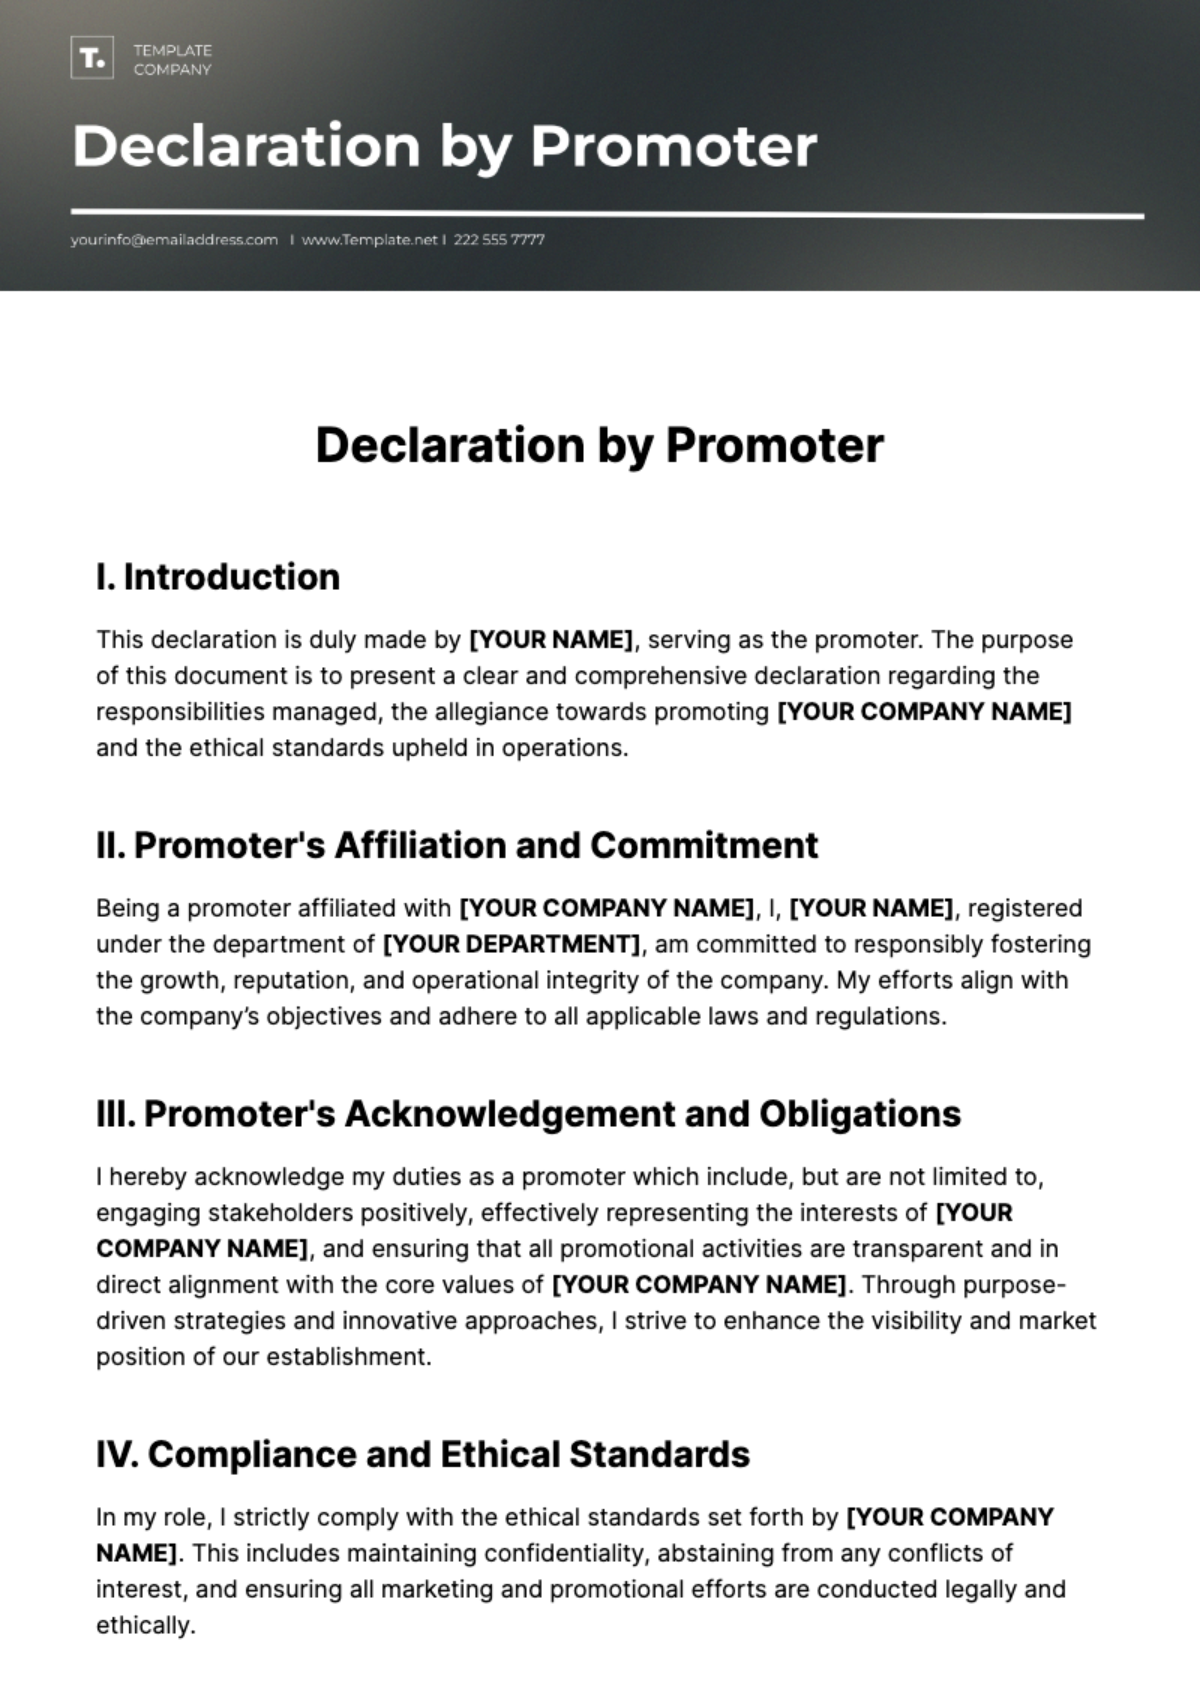 Declaration by Promoters Template